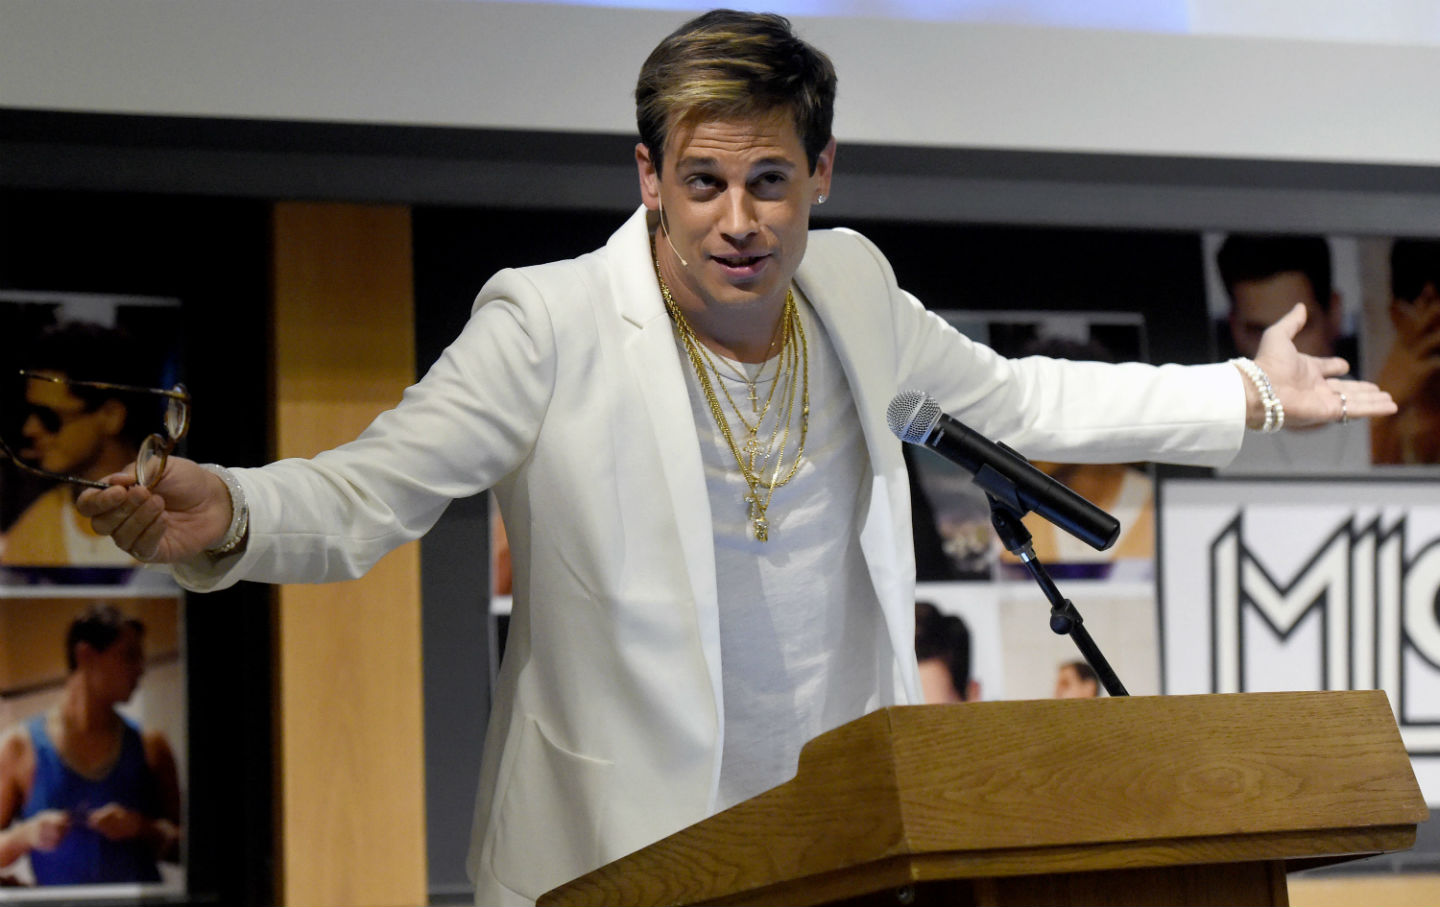 Is Milo Yiannopoulos All That Different From Trump?